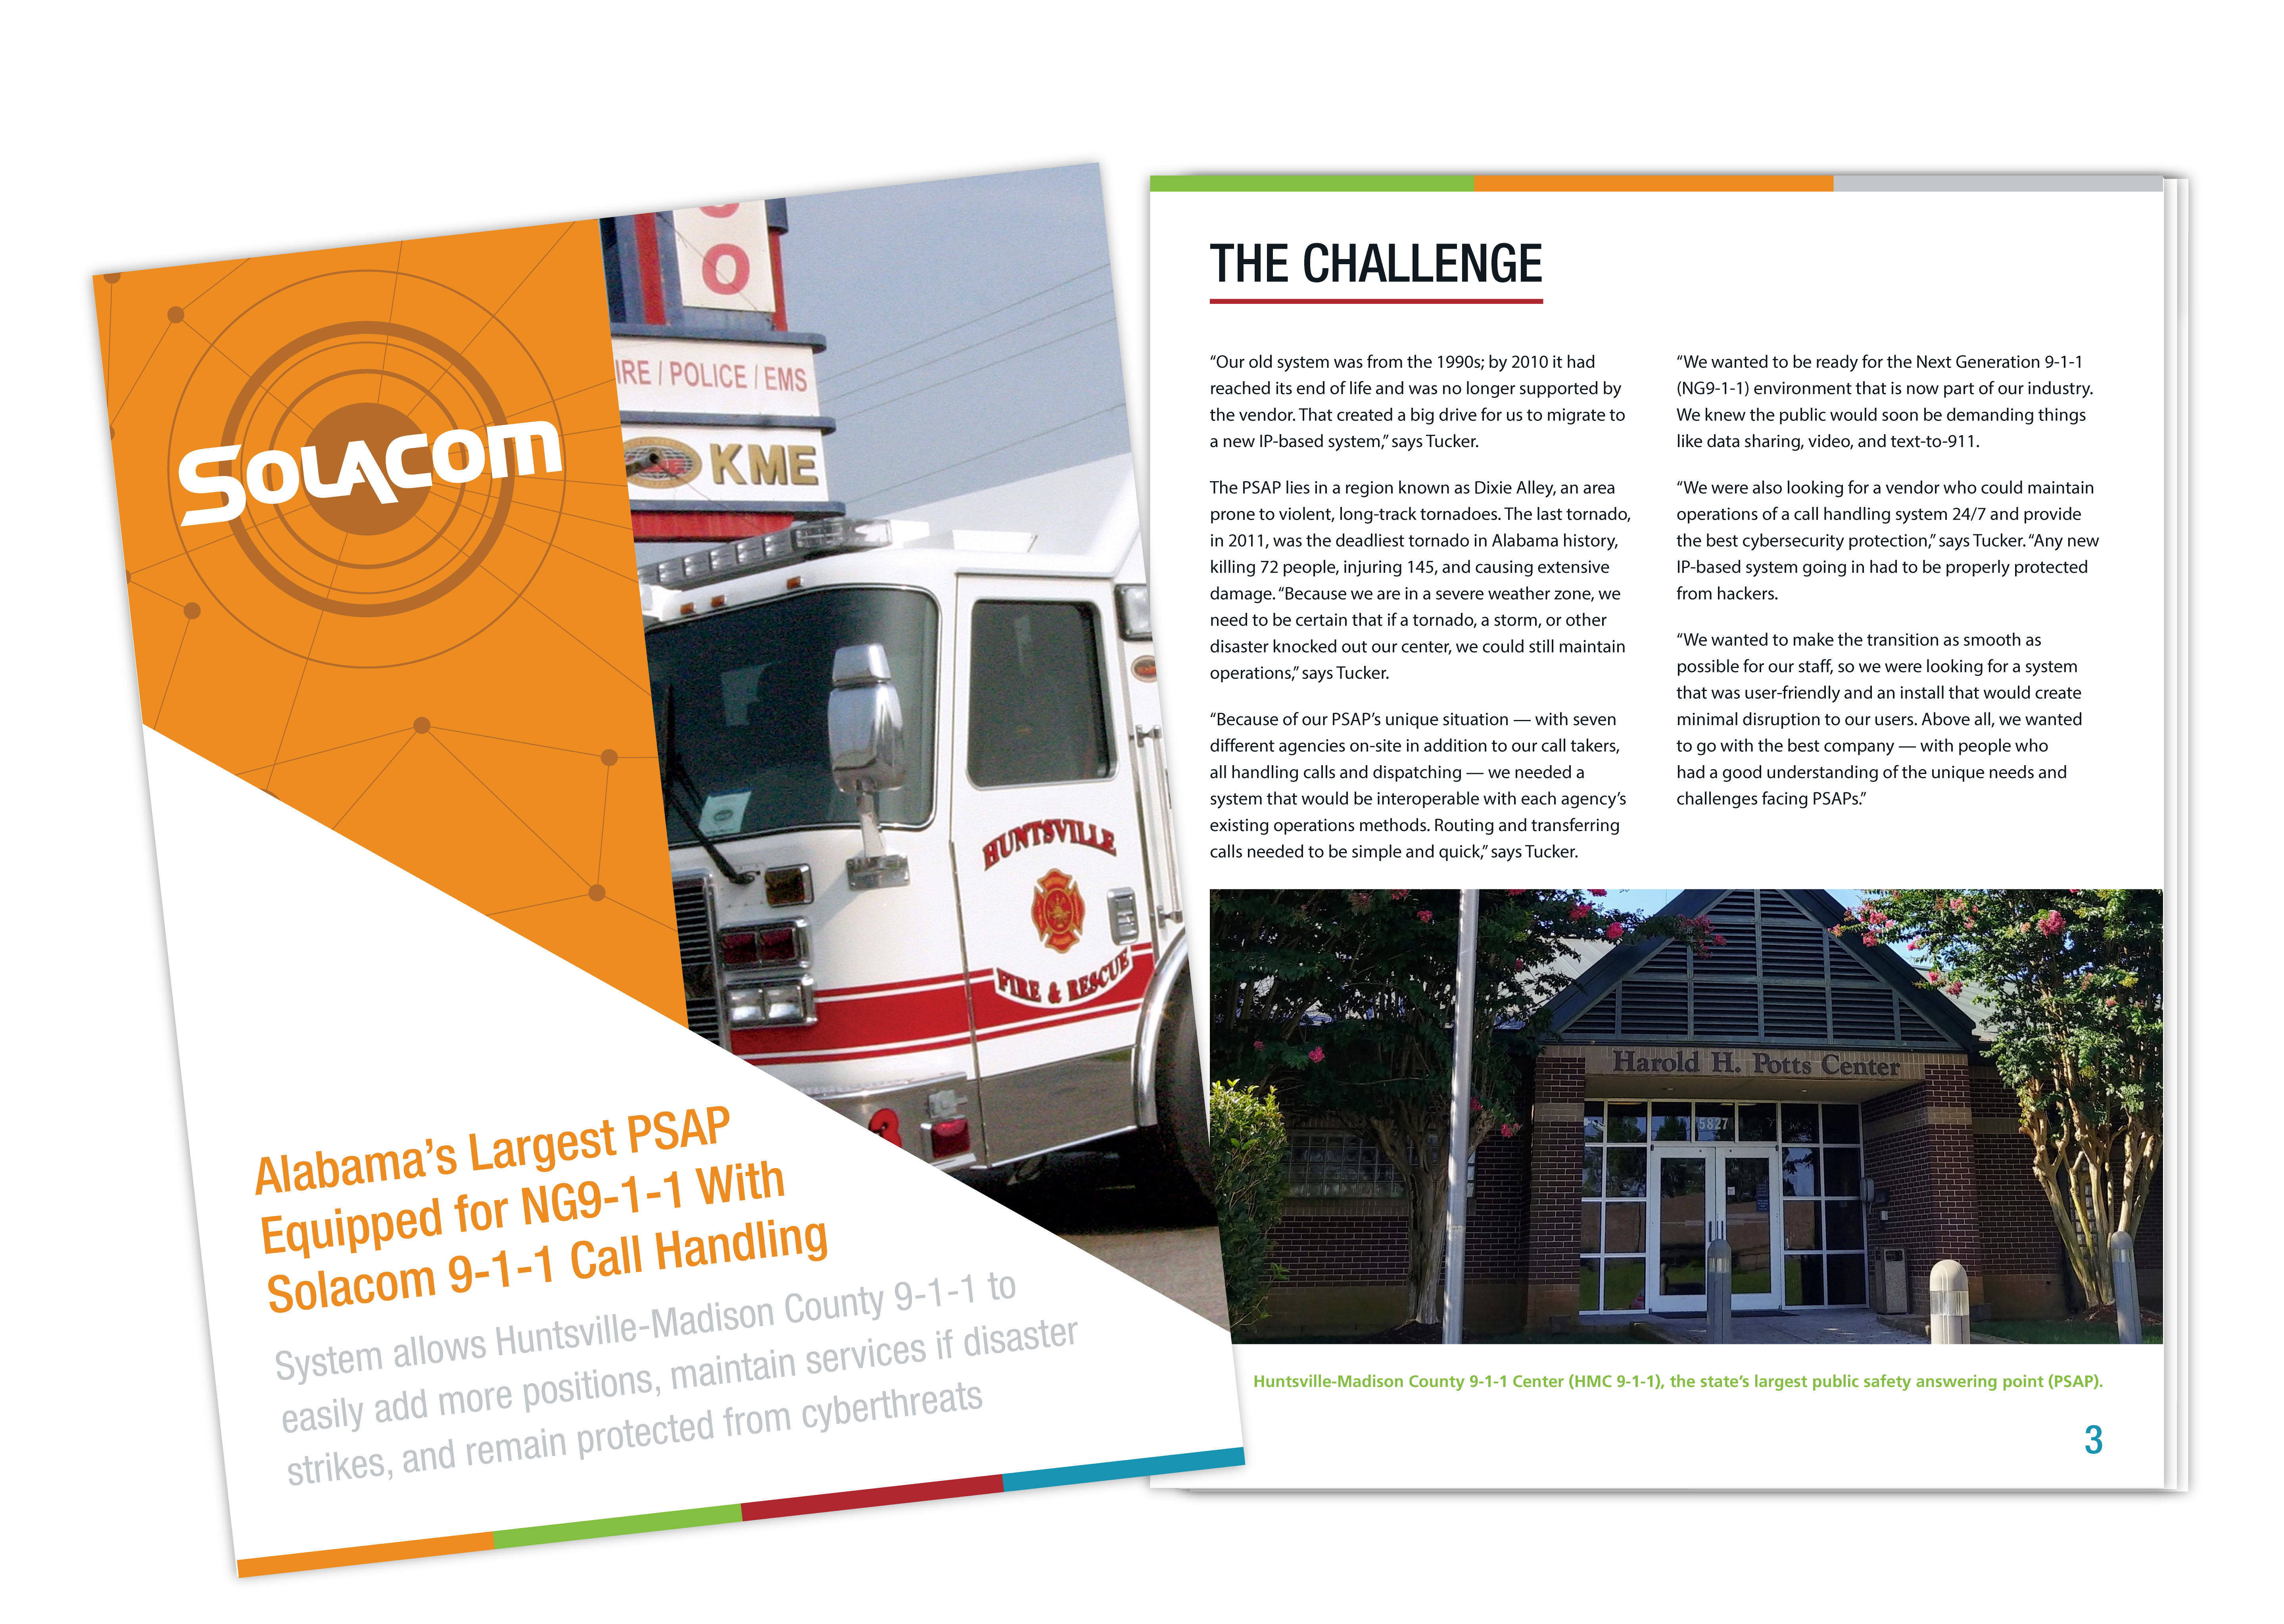 Alabama’s Largest PSAP Equipped for NG9-1-1 With Solacom 9-1-1 Call Handling, a Solacom case study